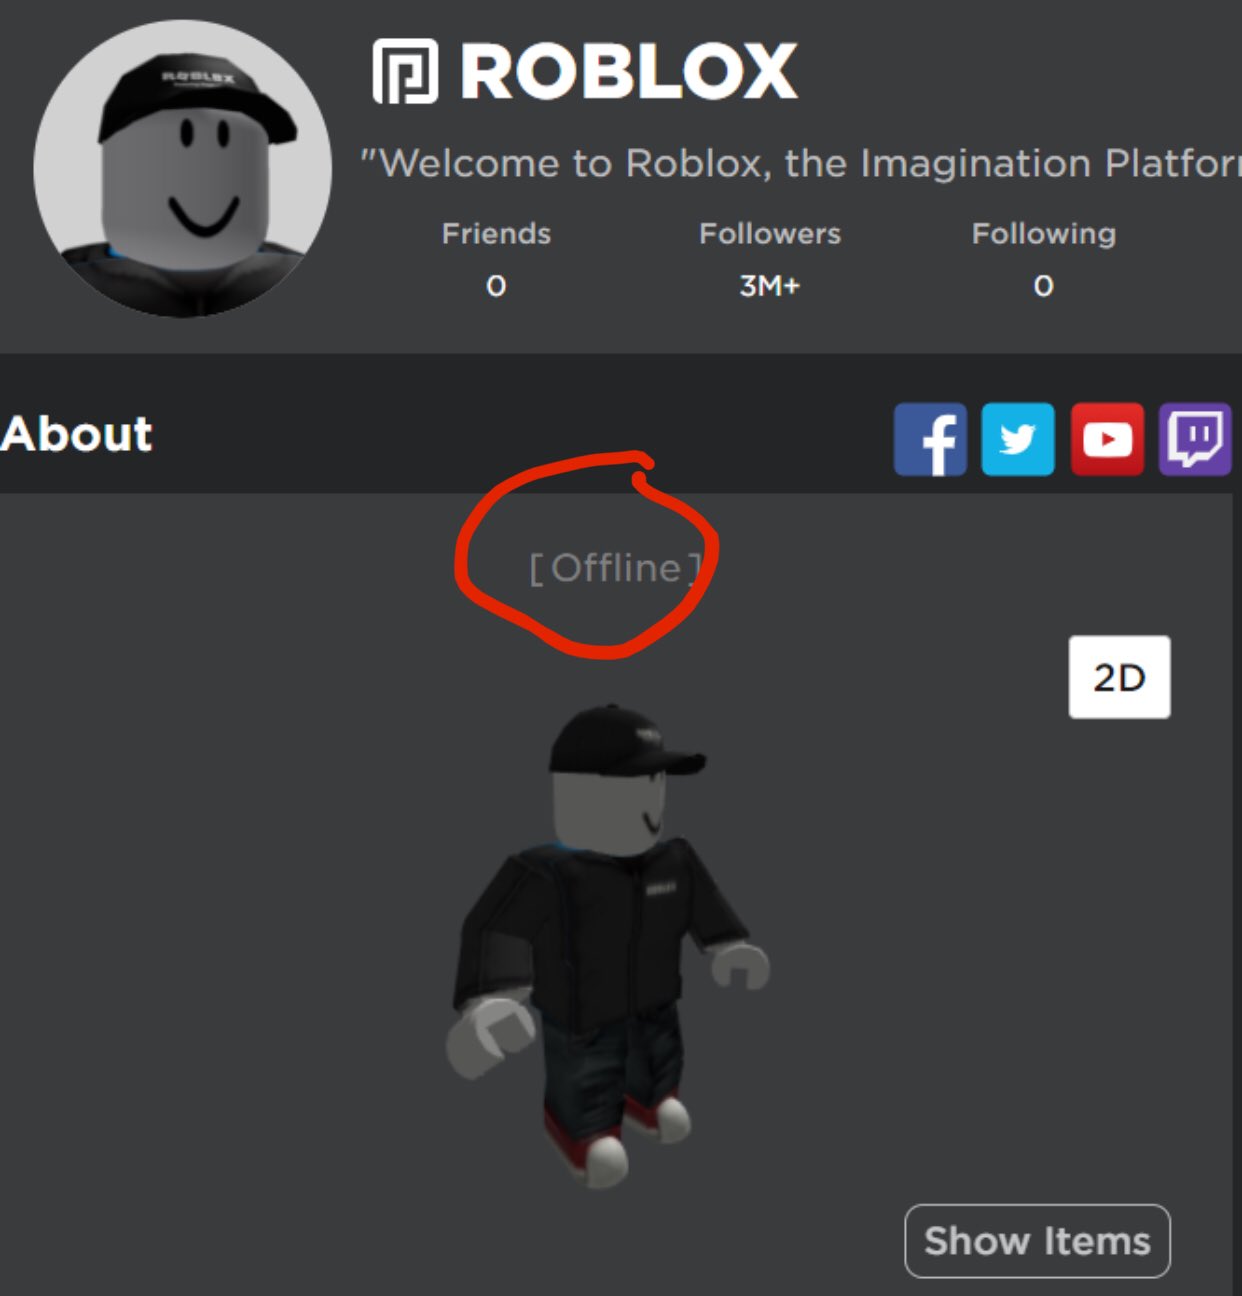 News Roblox On Twitter Roblox Is Offline Could This Mean The End - nathorix on twitter roblox should offer people a few